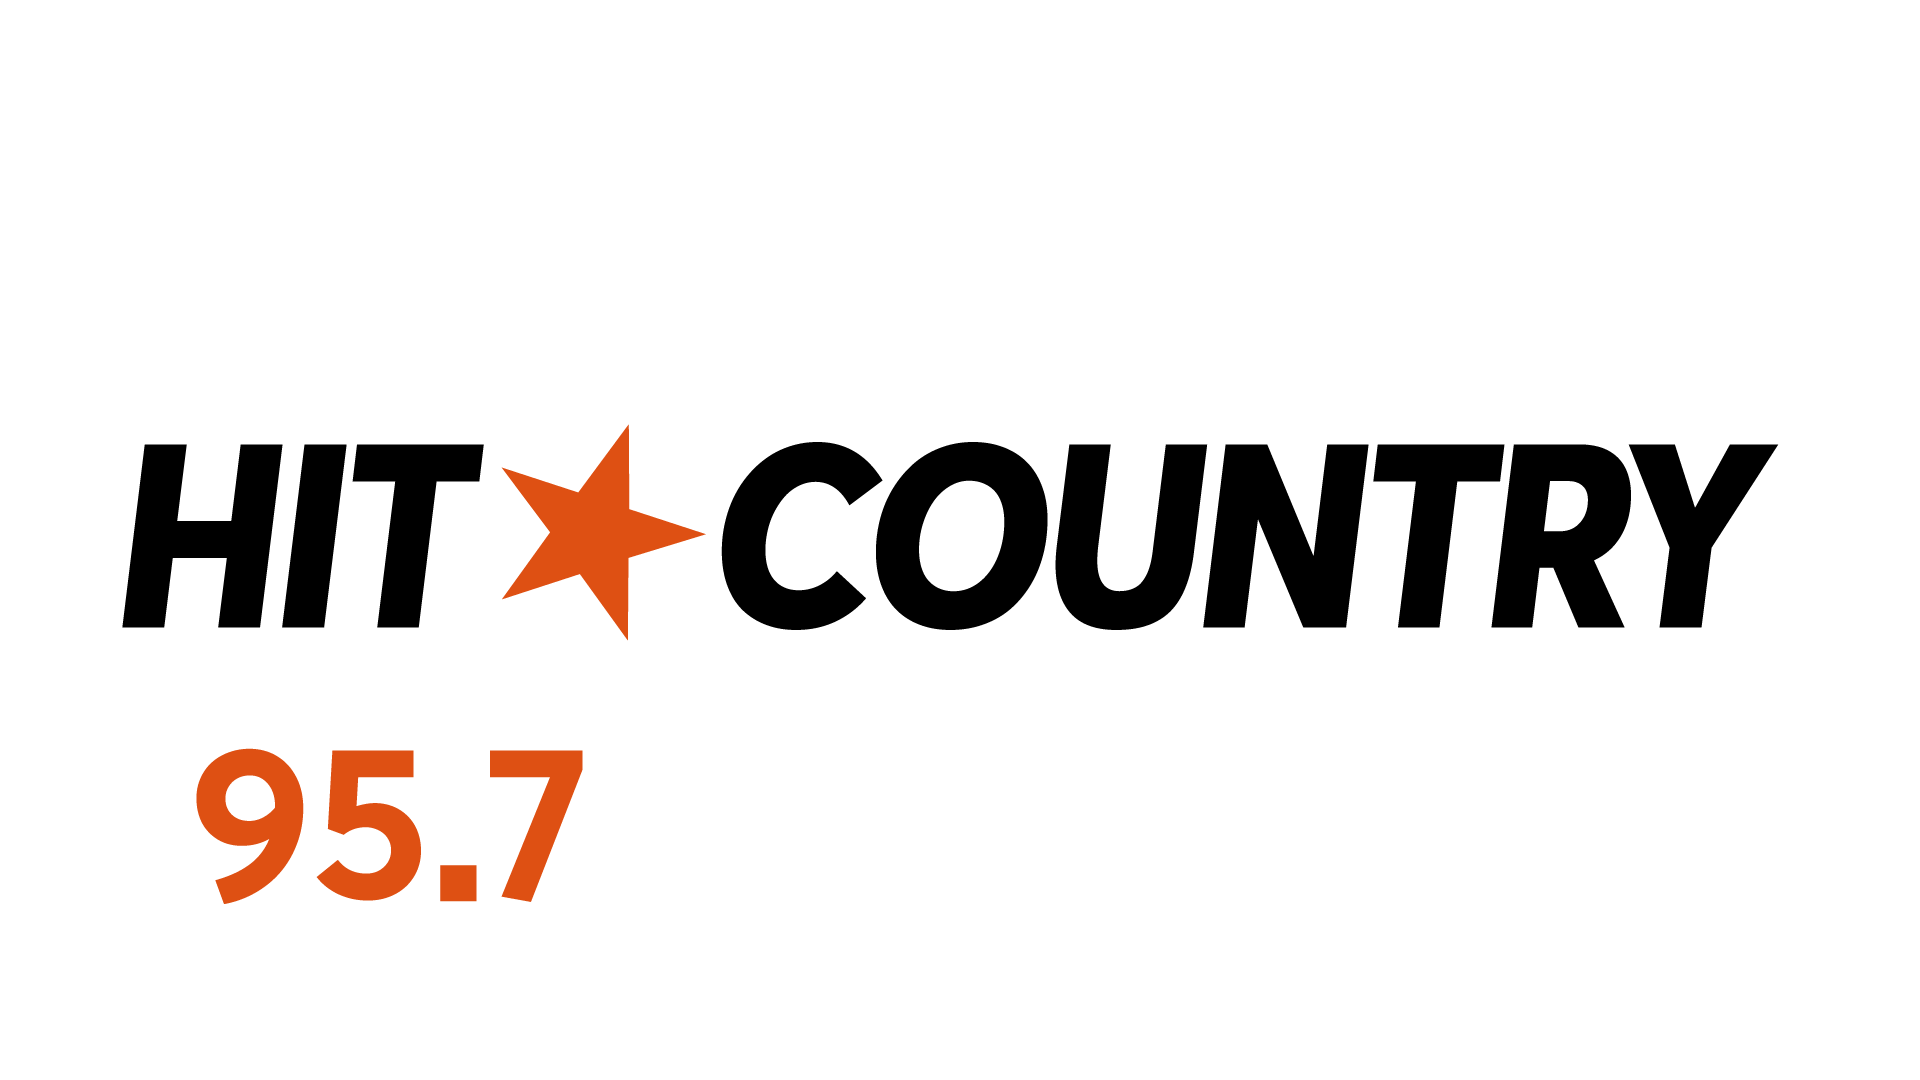 Hit Country 95,7